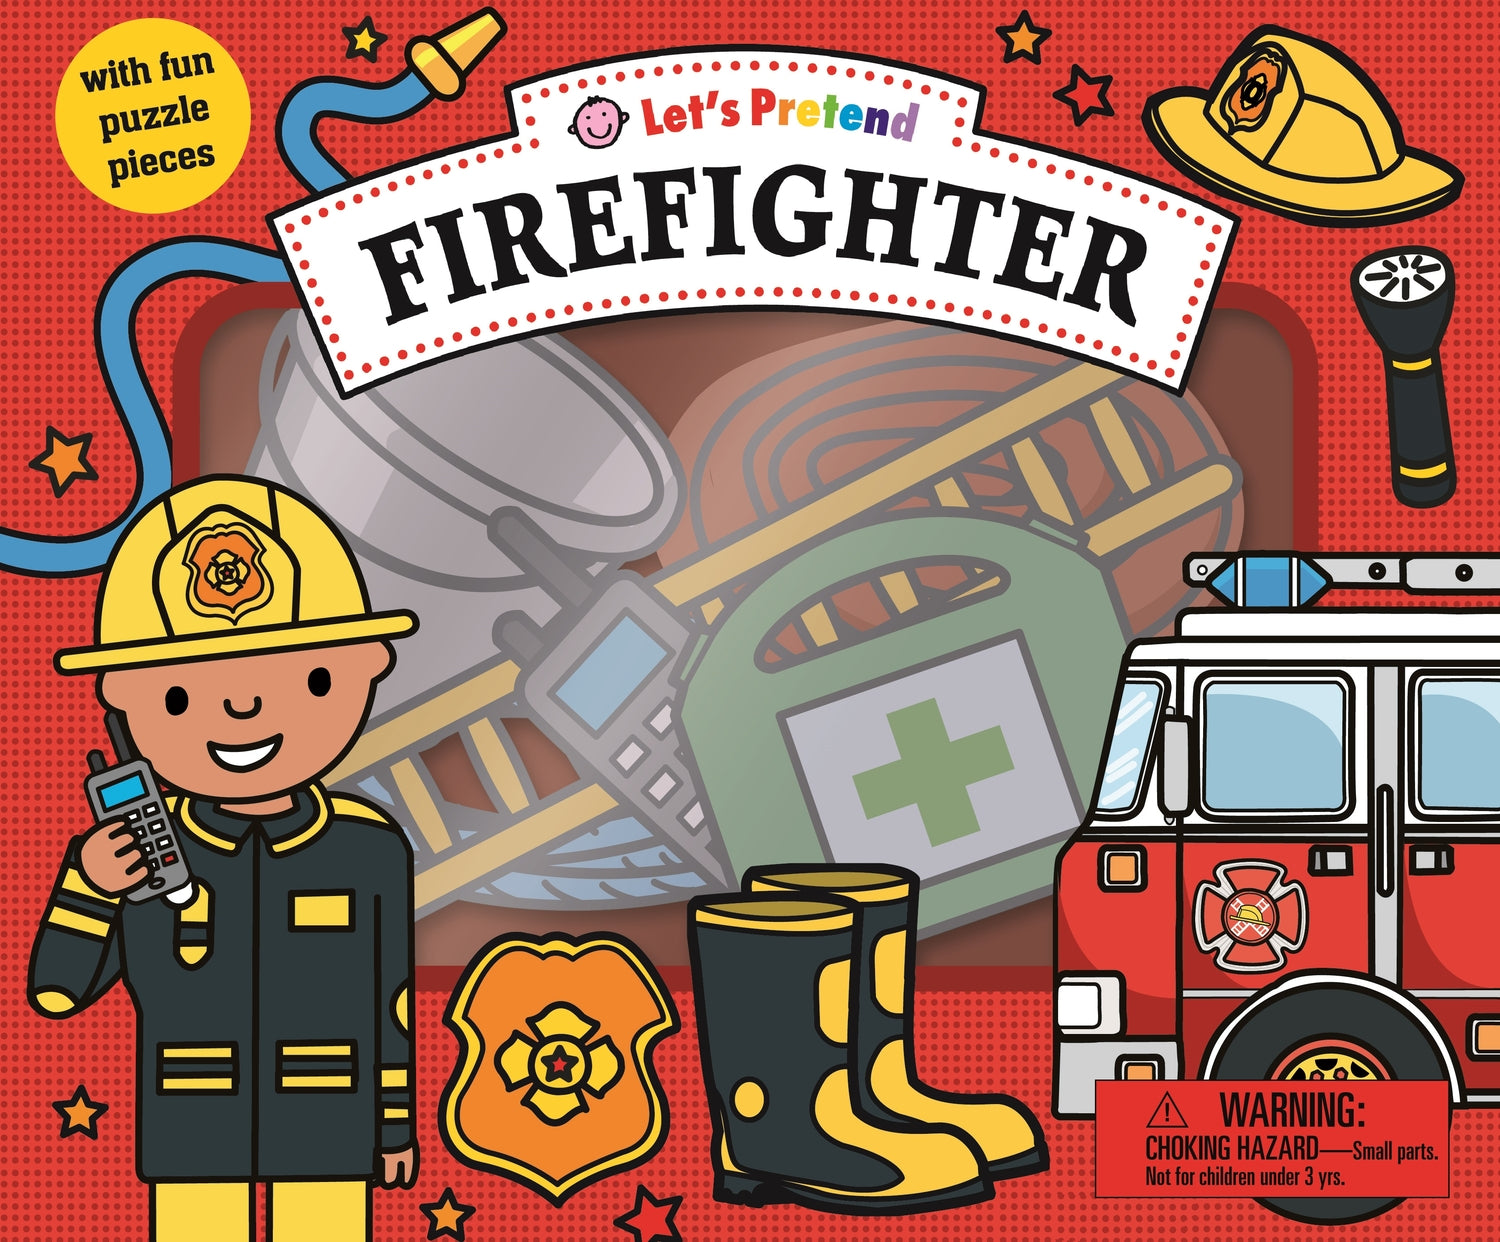 Let&#39;s Pretend: Firefighter Set: With Fun Puzzle Pieces